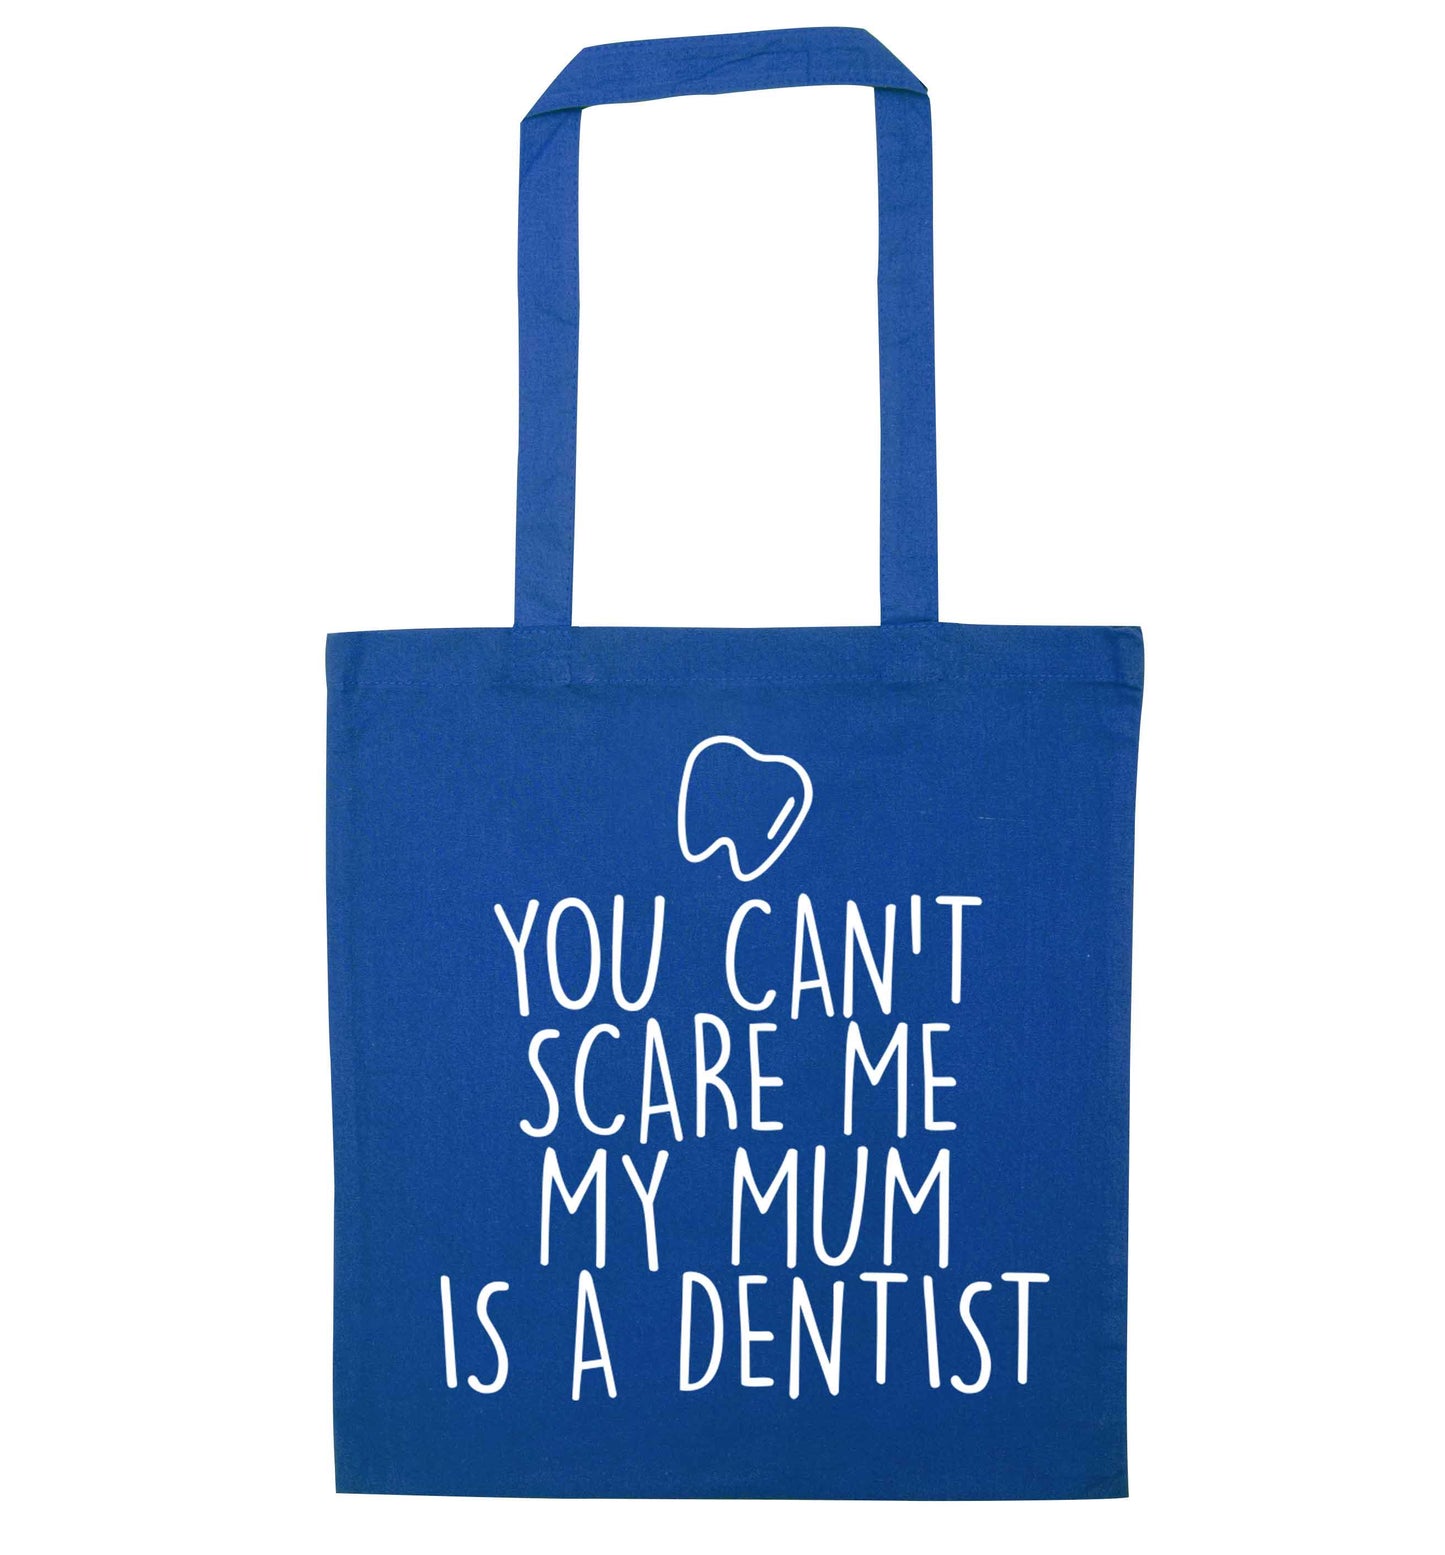 Minty Kisses Tooth Fairy (a) blue tote bag